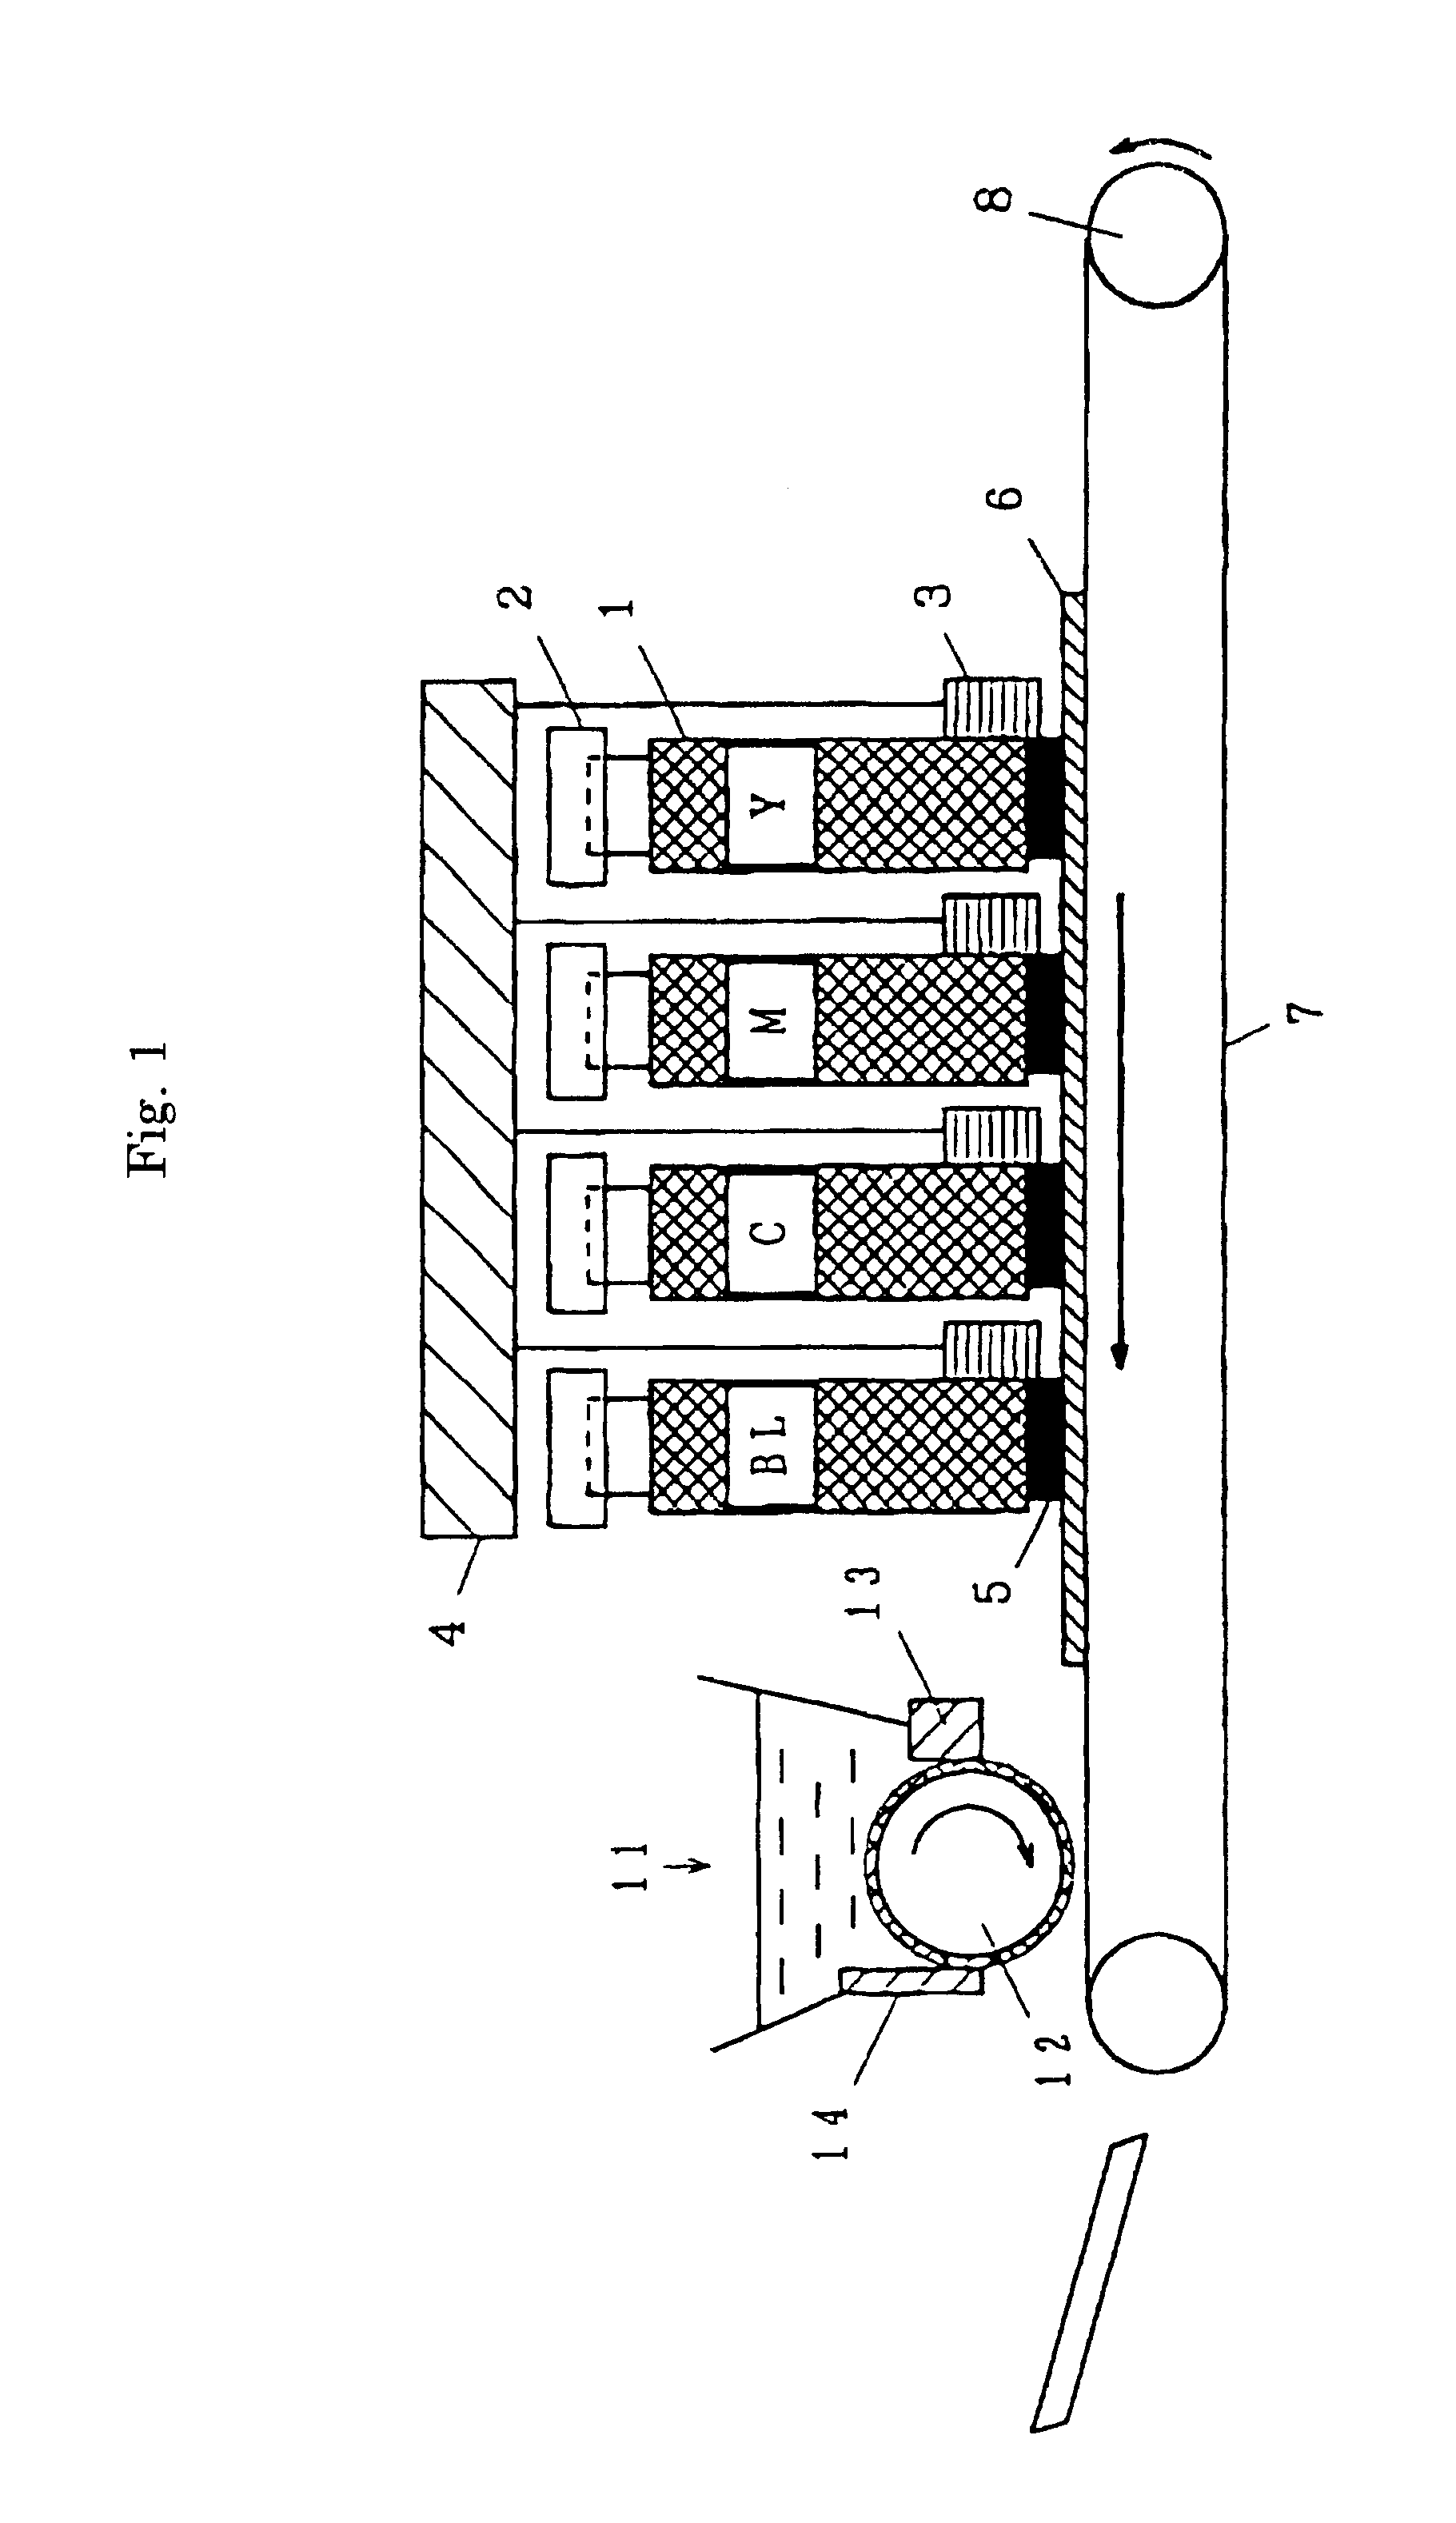 Image forming apparatus and image forming method using an extrusion opening and shutter for releasing recording solution